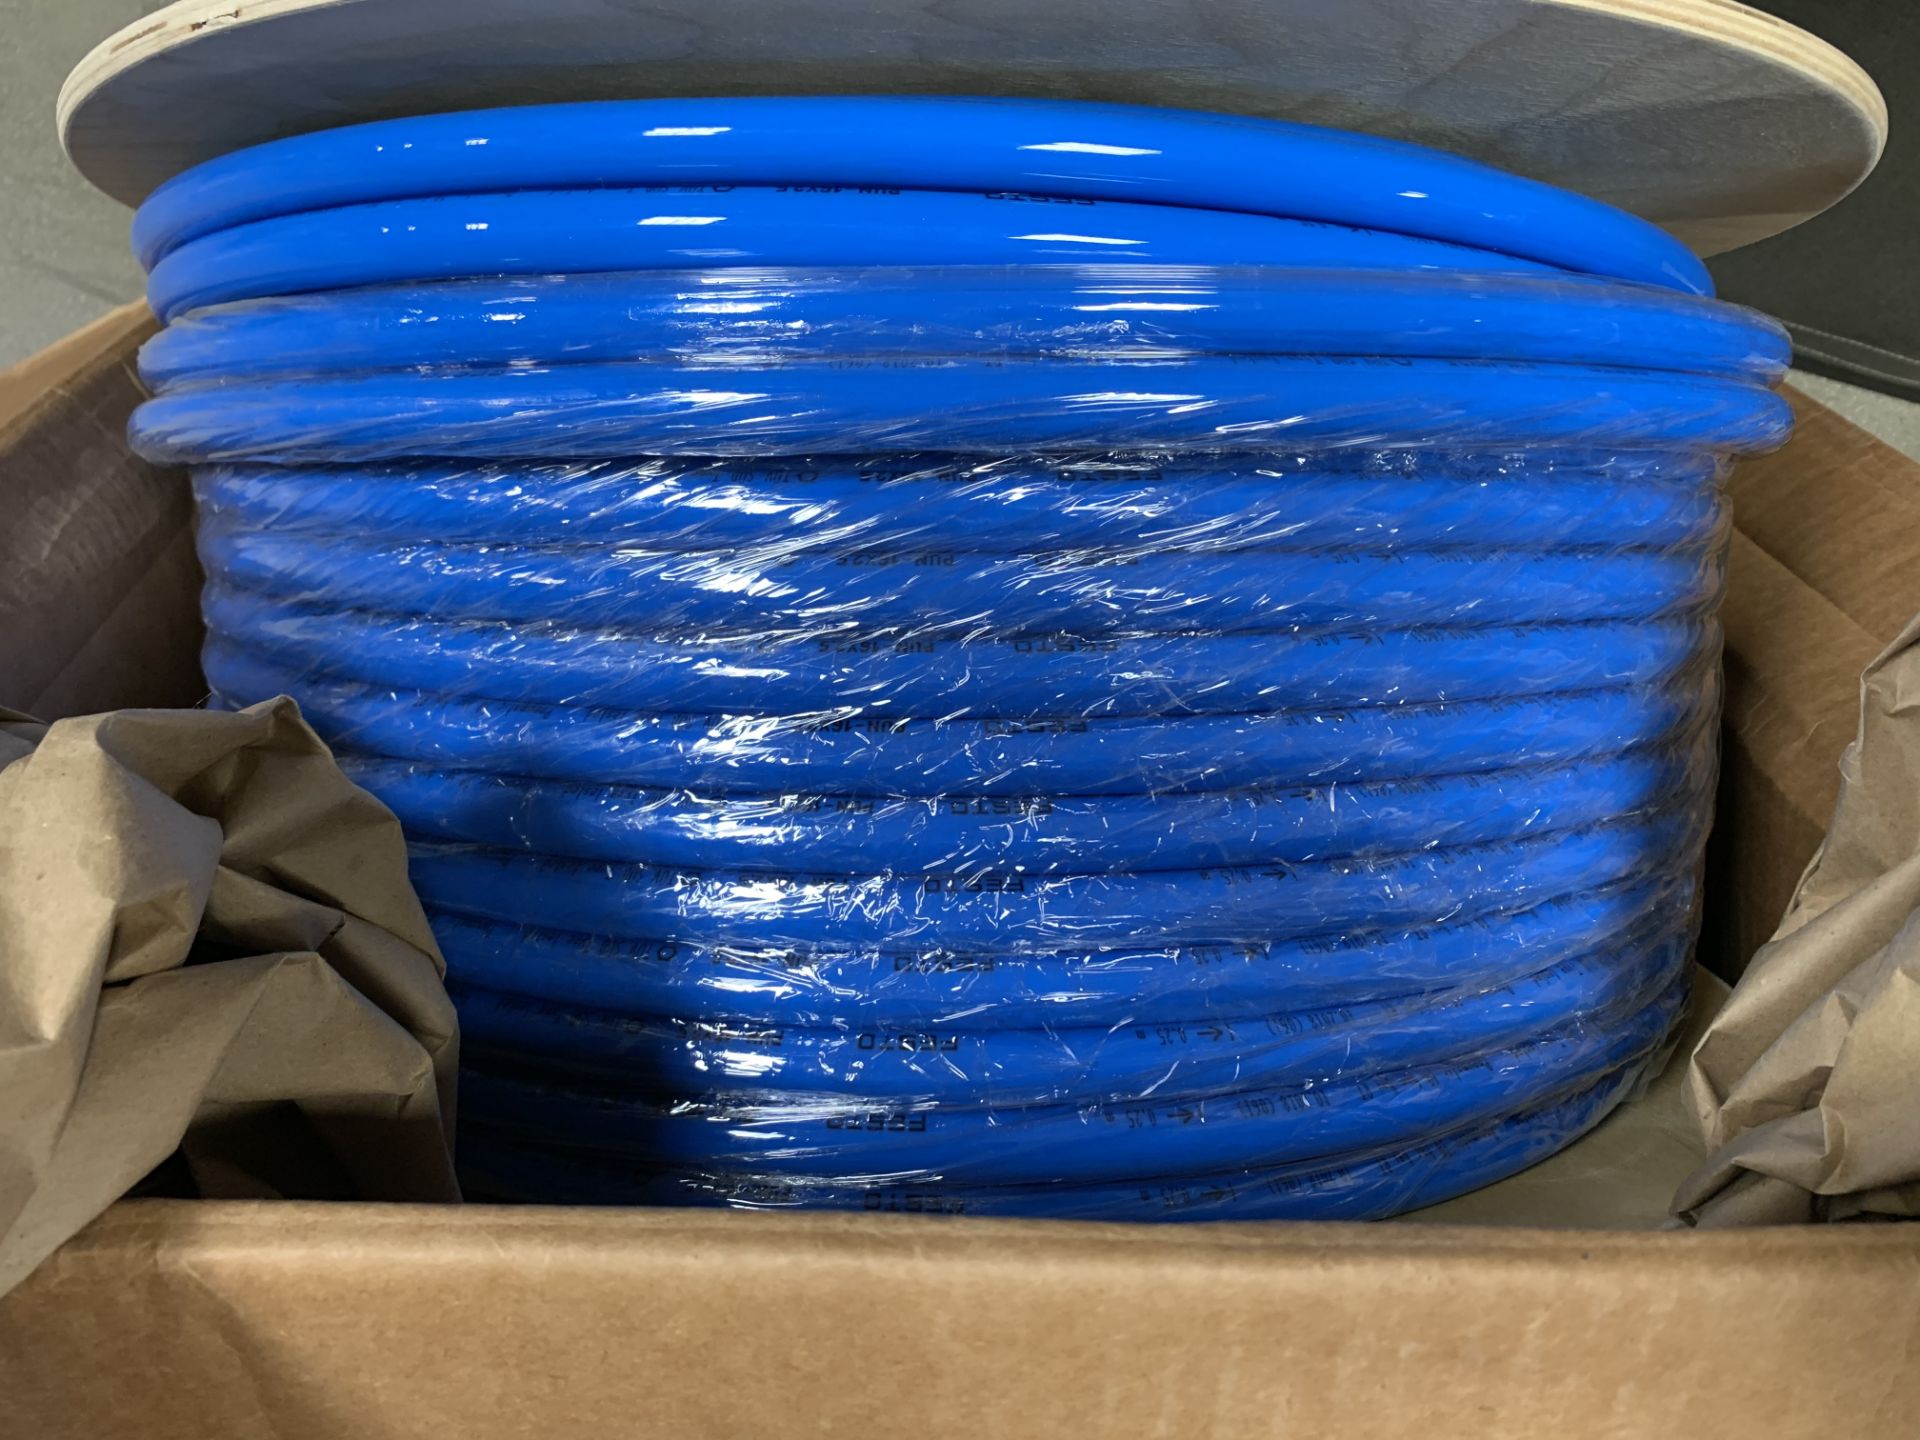 NEW OUT OF BOX - FESTO ELECTRIC REEL OF 100 METERS BLUE PLASTIC TUBING 525751 PUN-16X2,5-BL-100 - Bild 3 aus 3